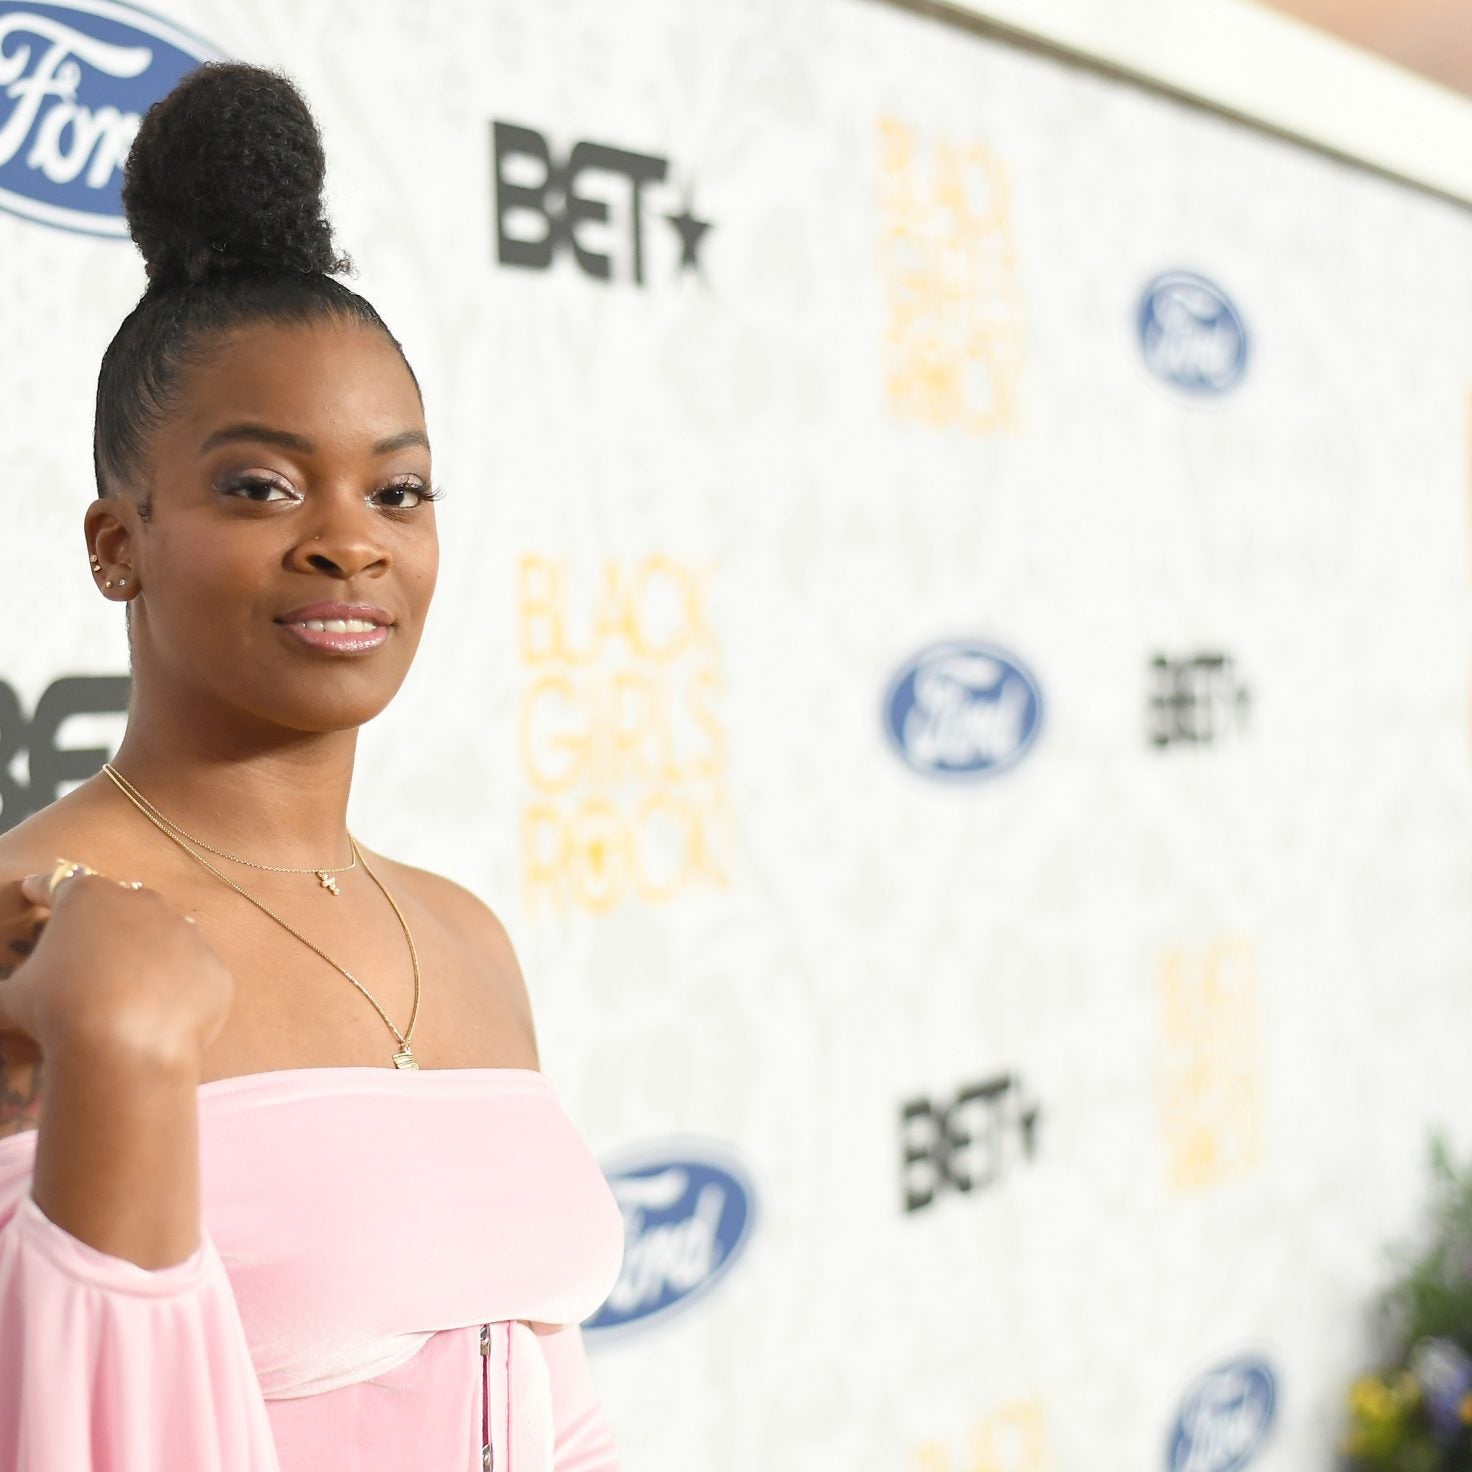 Ari Lennox Calls Out Troll Who Compared Her To Rottweilers: ‘Why Are You So Comfortable Tearing Down Black Women?’